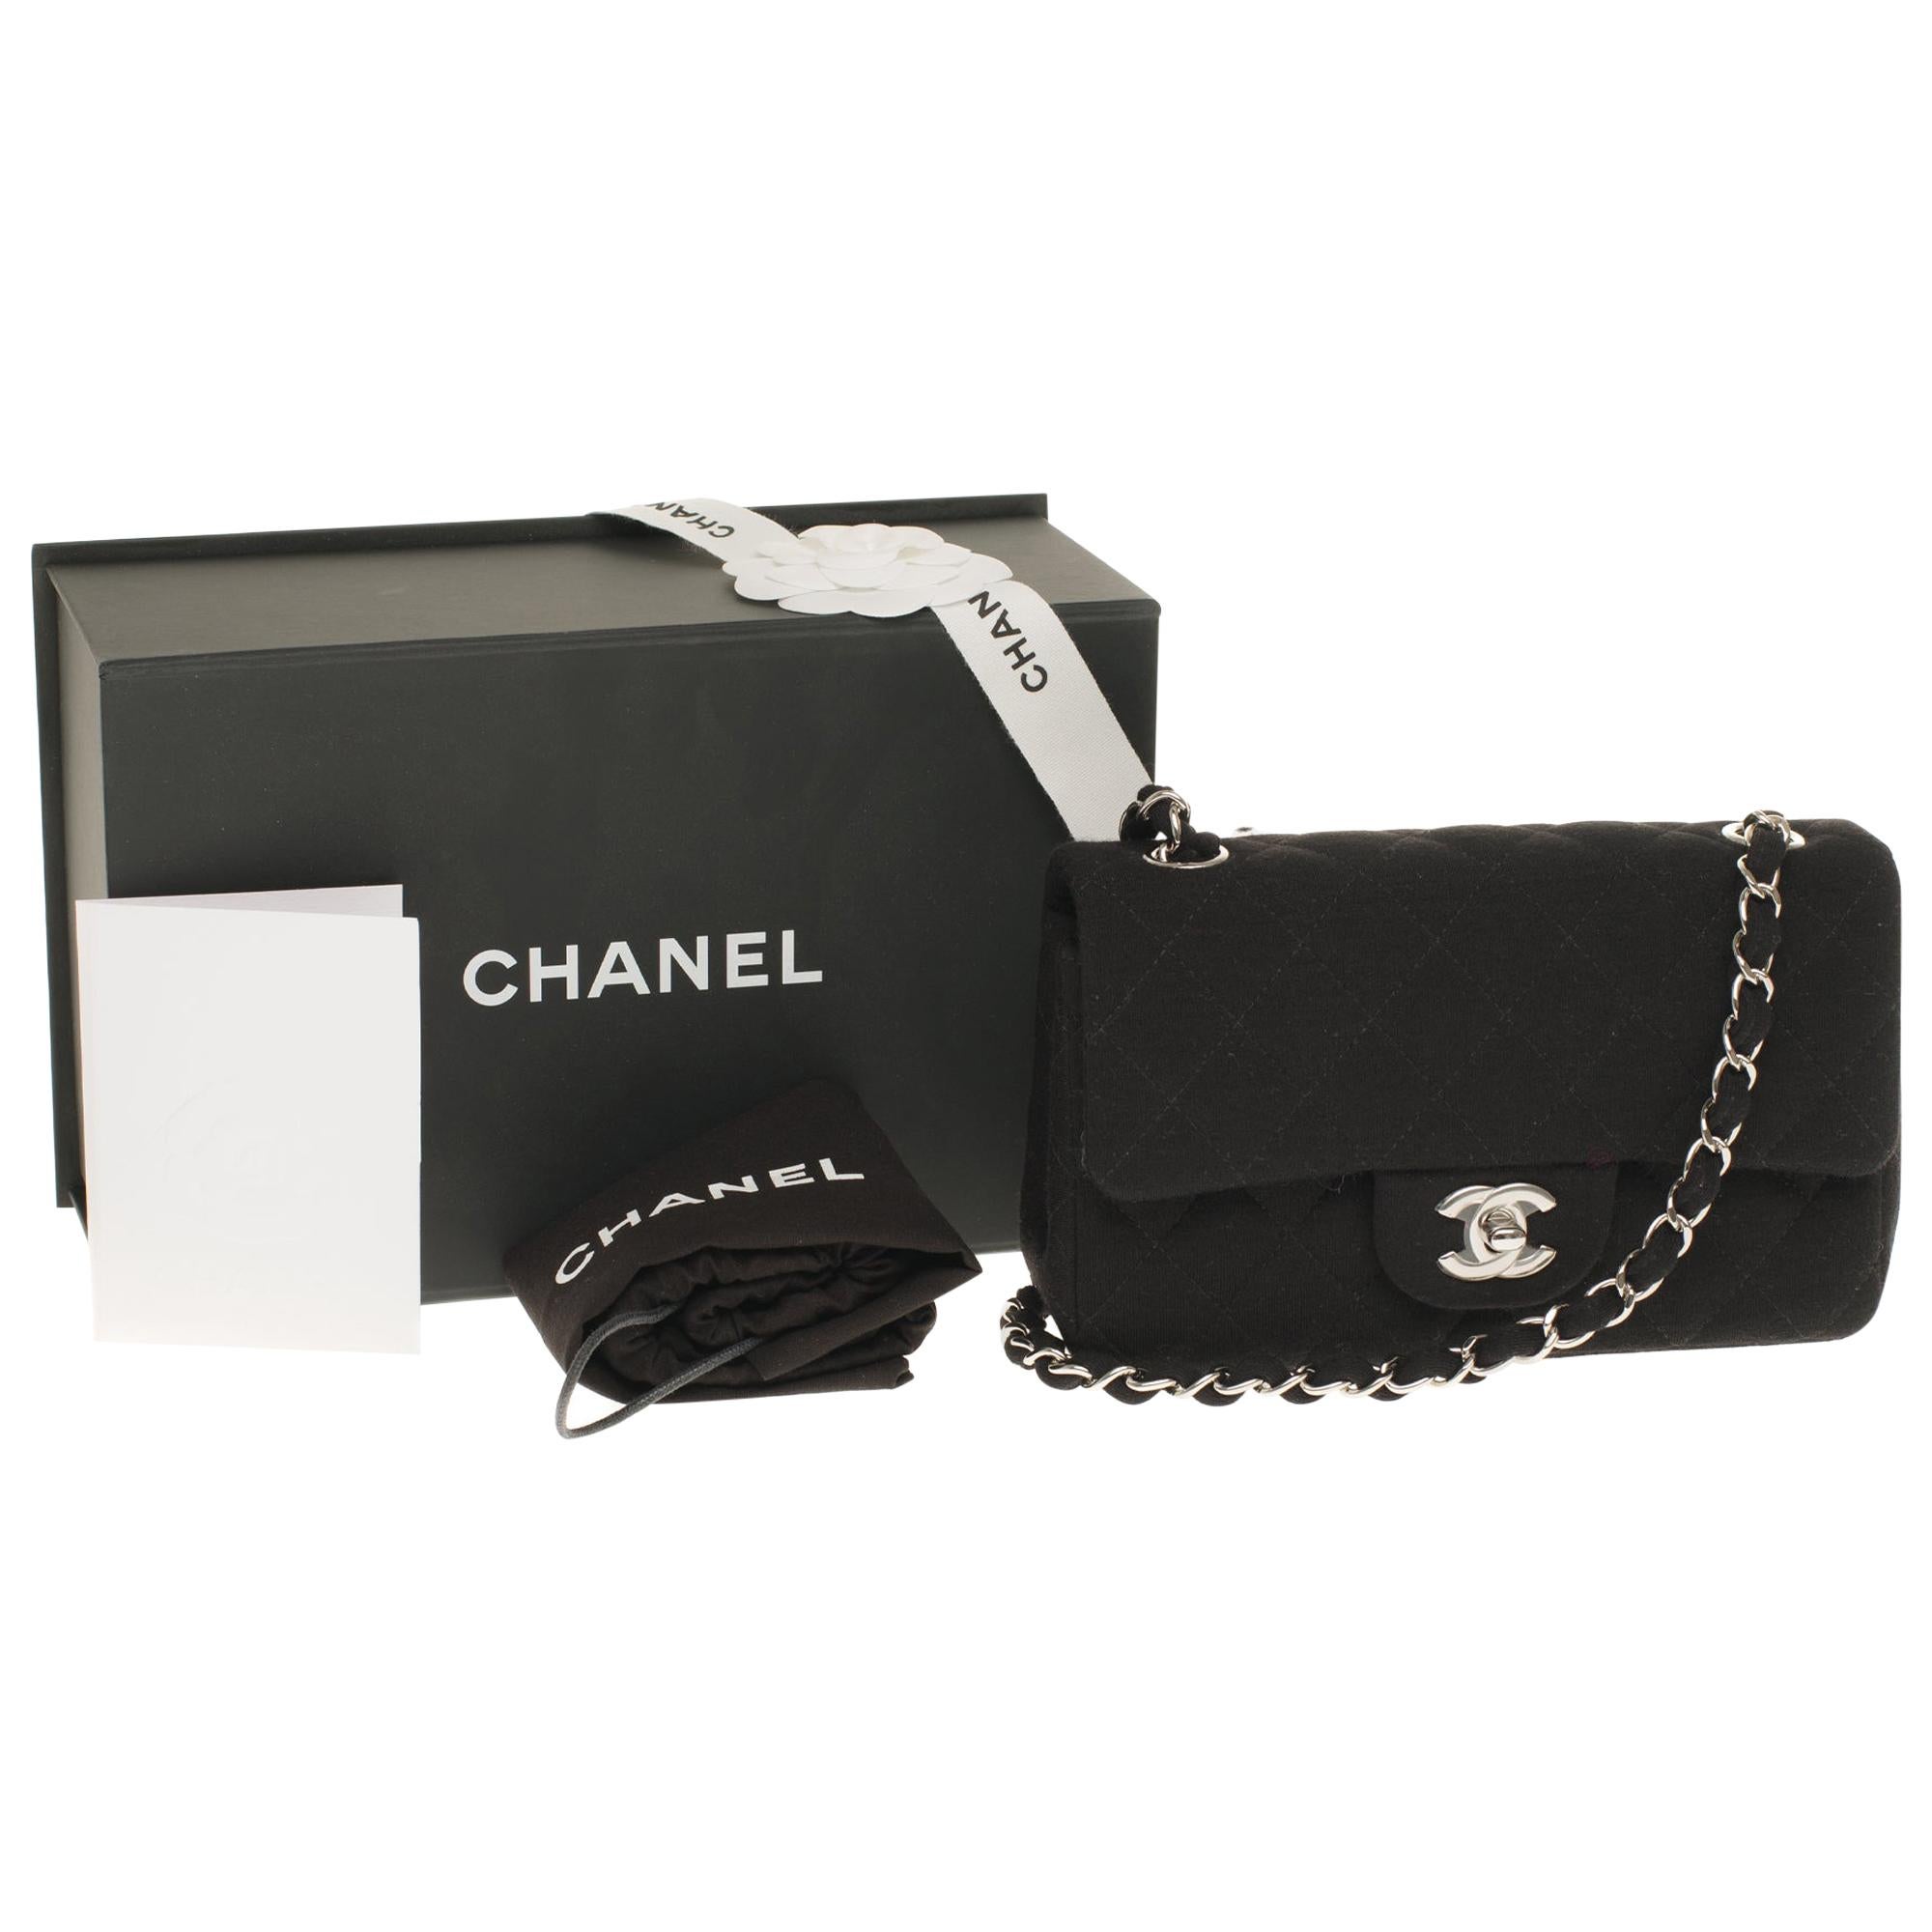 Chanel Mini Timeless handbag in black quilted Tweed and silver hardware